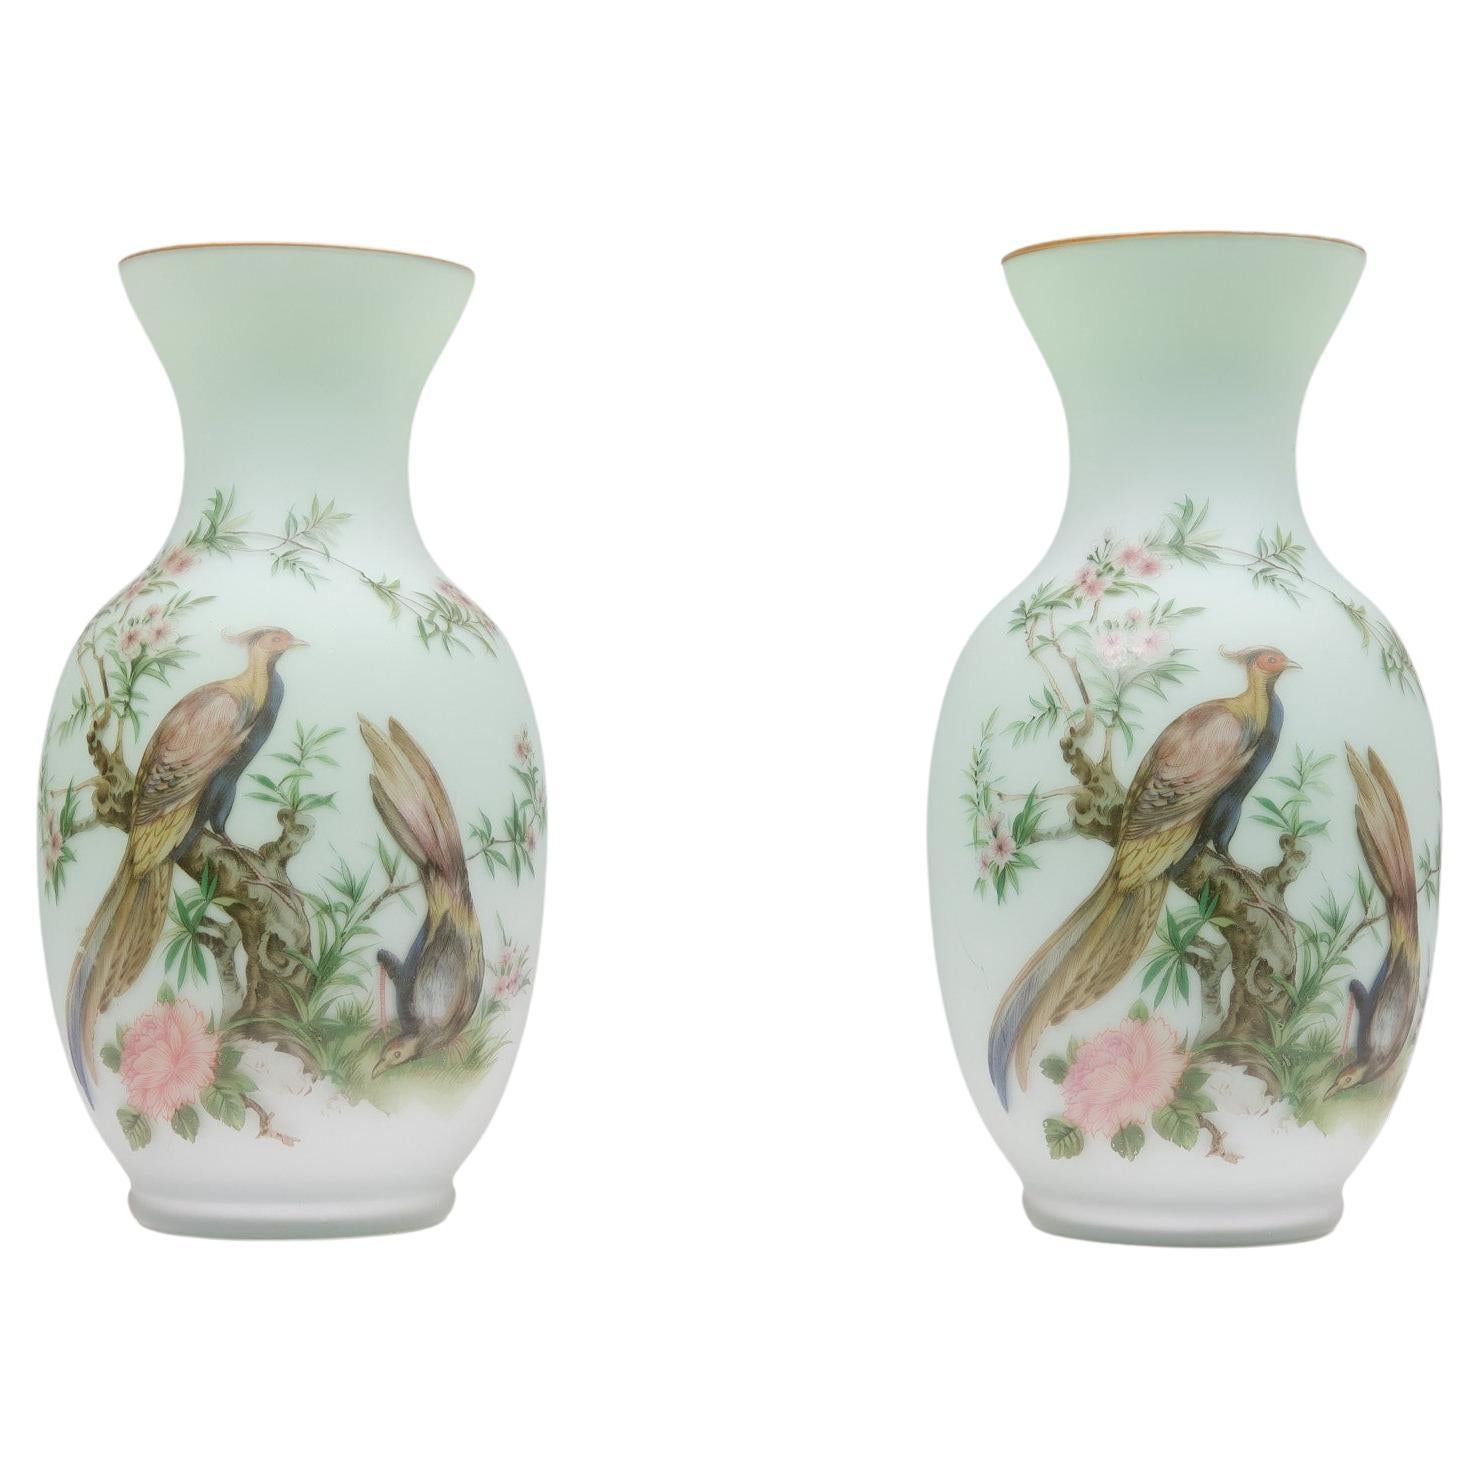 Norleans - Made in Italy - Opaline  Glass Hand Painted Vases 